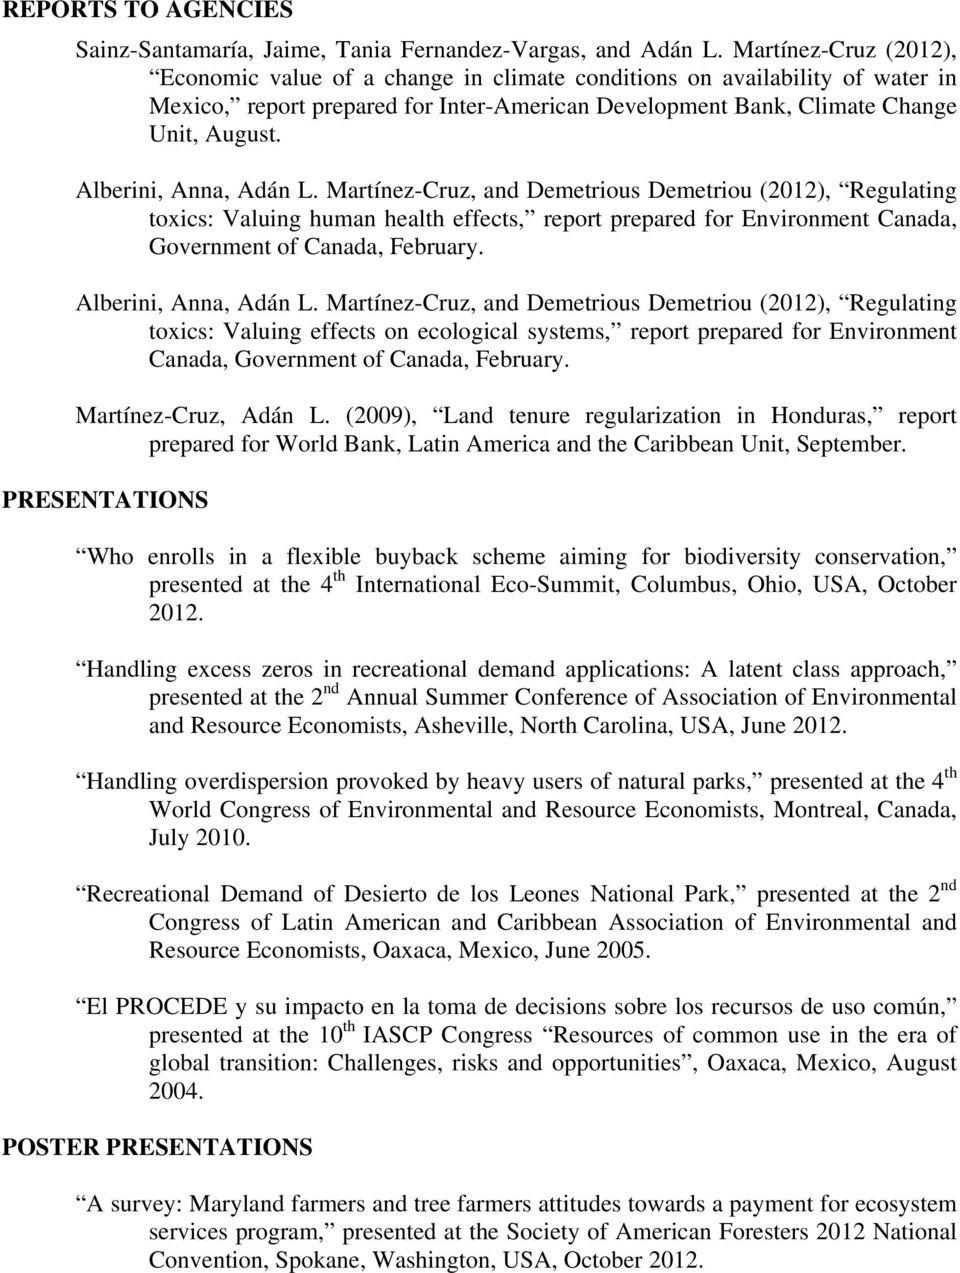 Alberini, Anna, Adán L. Martínez-Cruz, and Demetrious Demetriou (2012), Regulating toxics: Valuing human health effects, report prepared for Environment Canada, Government of Canada, February.